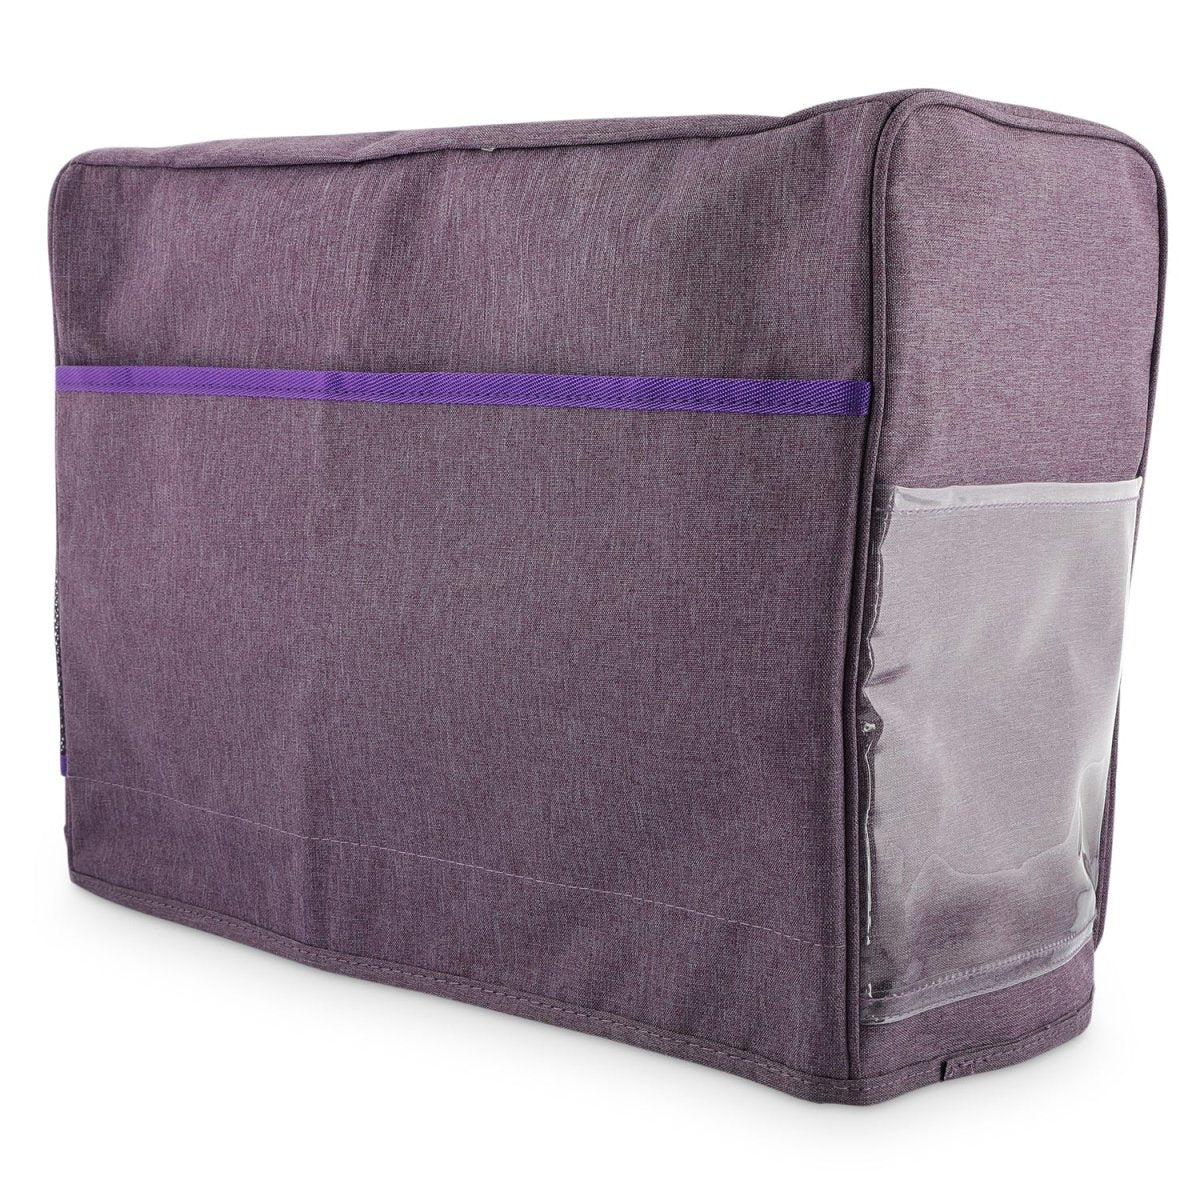  Sewing Machine Cover, Waterproof Sewing Equipment Cover Shell  with Pockets Sewing Machine Dust Cover for Extra Accessories (Purple) :  Arts, Crafts & Sewing